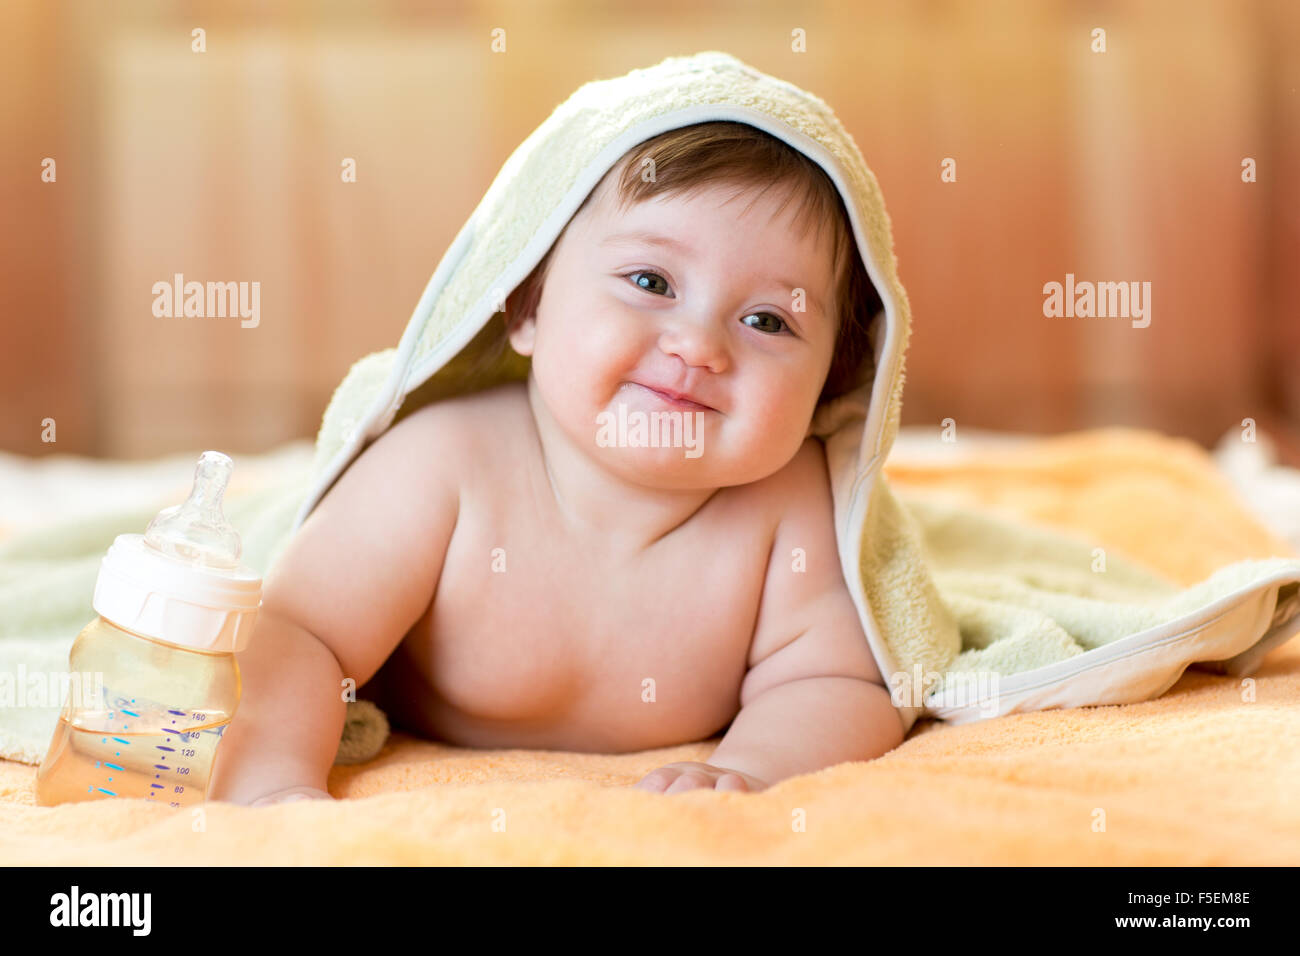 Adorable baby child under a hooded towel after bathing Stock Photo